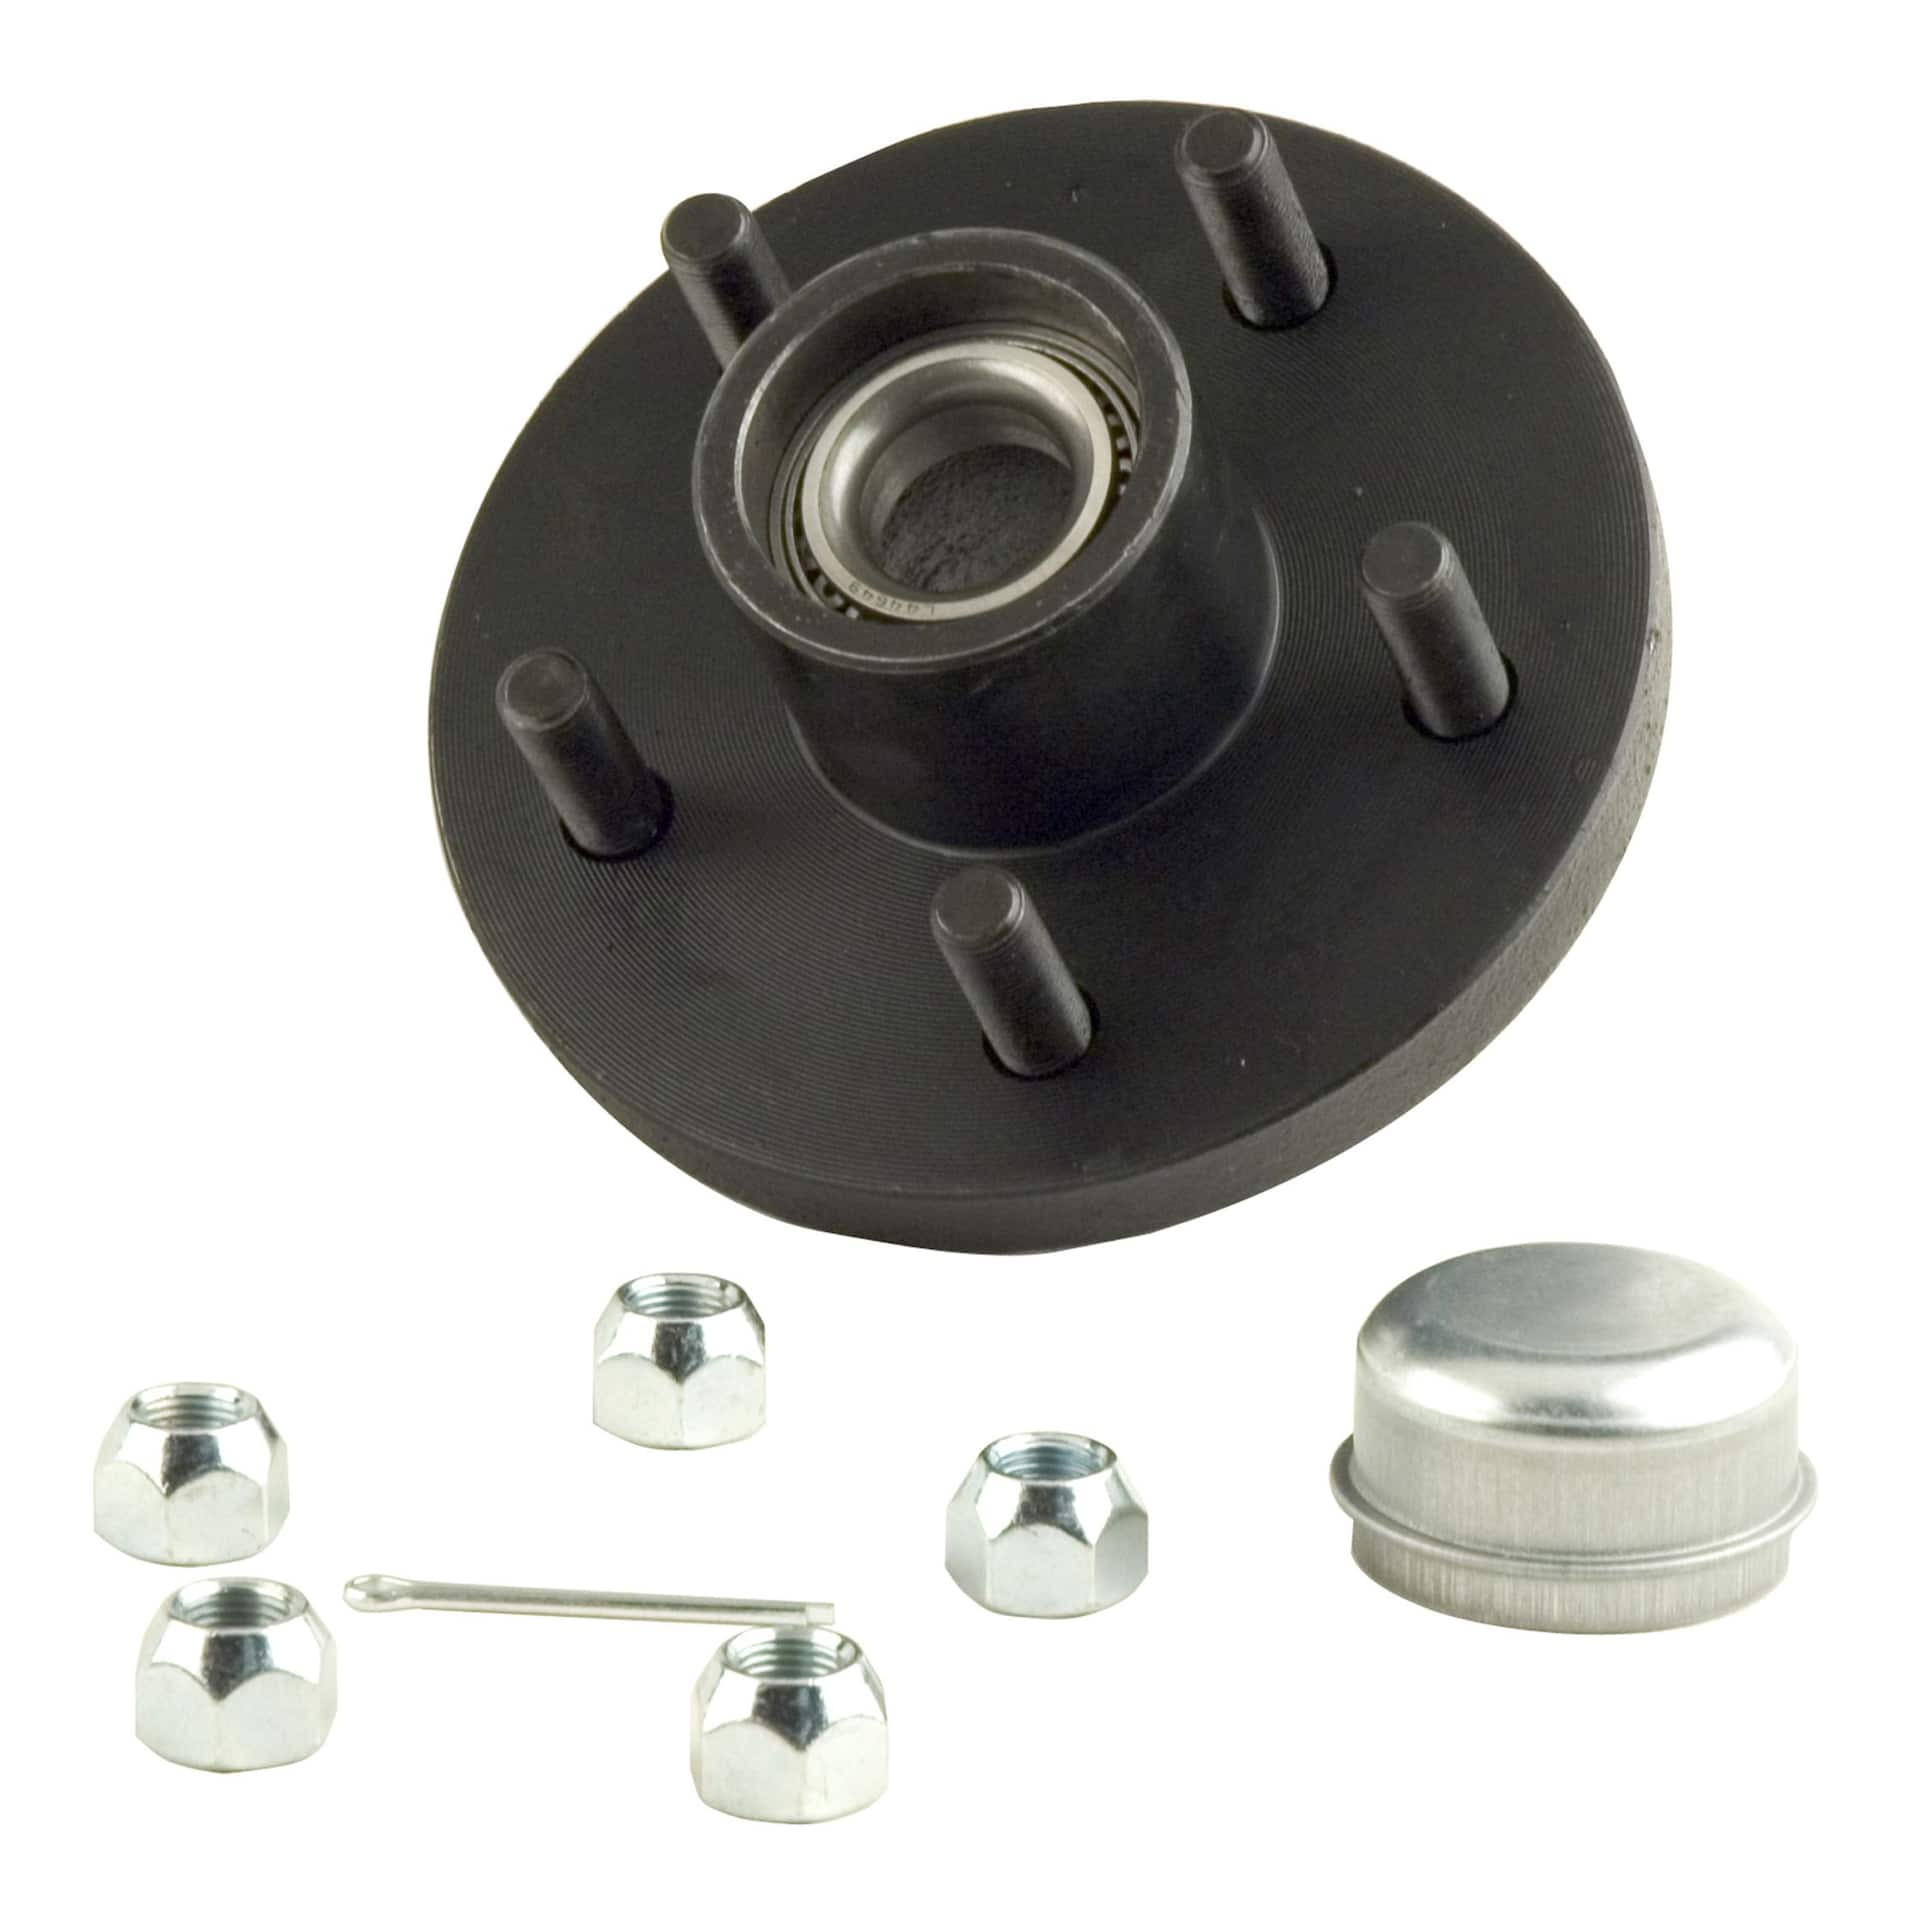 C.E. Smith Trailer Hub Assembly Kit, 1-in Straight, 5 x 4-1/2-in